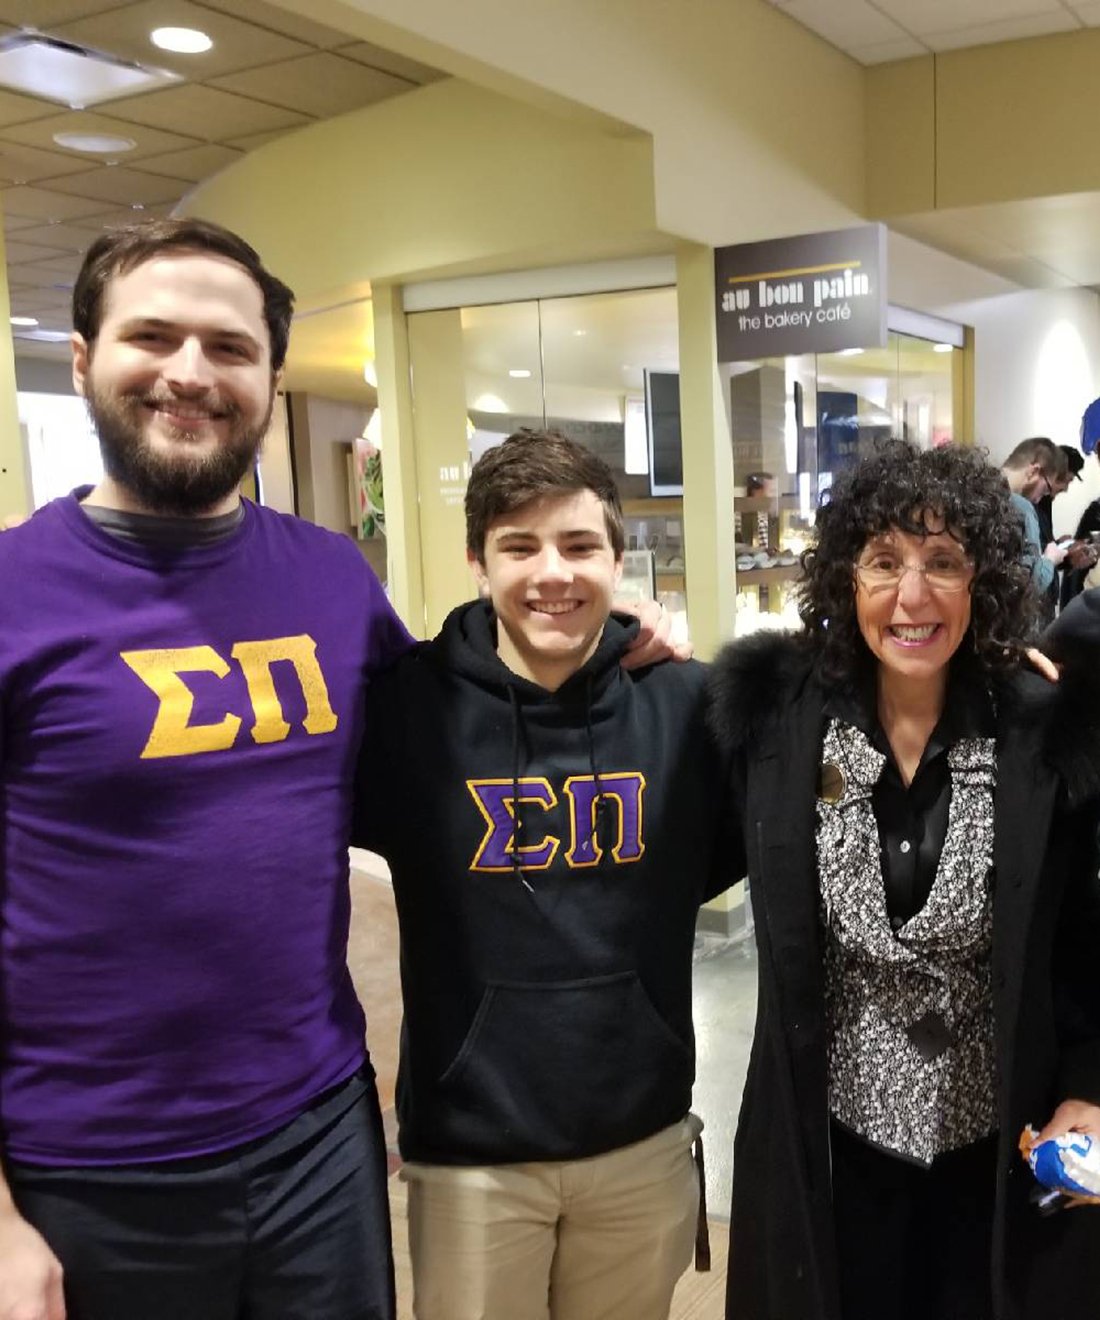 Members of Sigma Pi fraternity standing with OU President Ora Hirsch Pescovitz in the Oakland Center